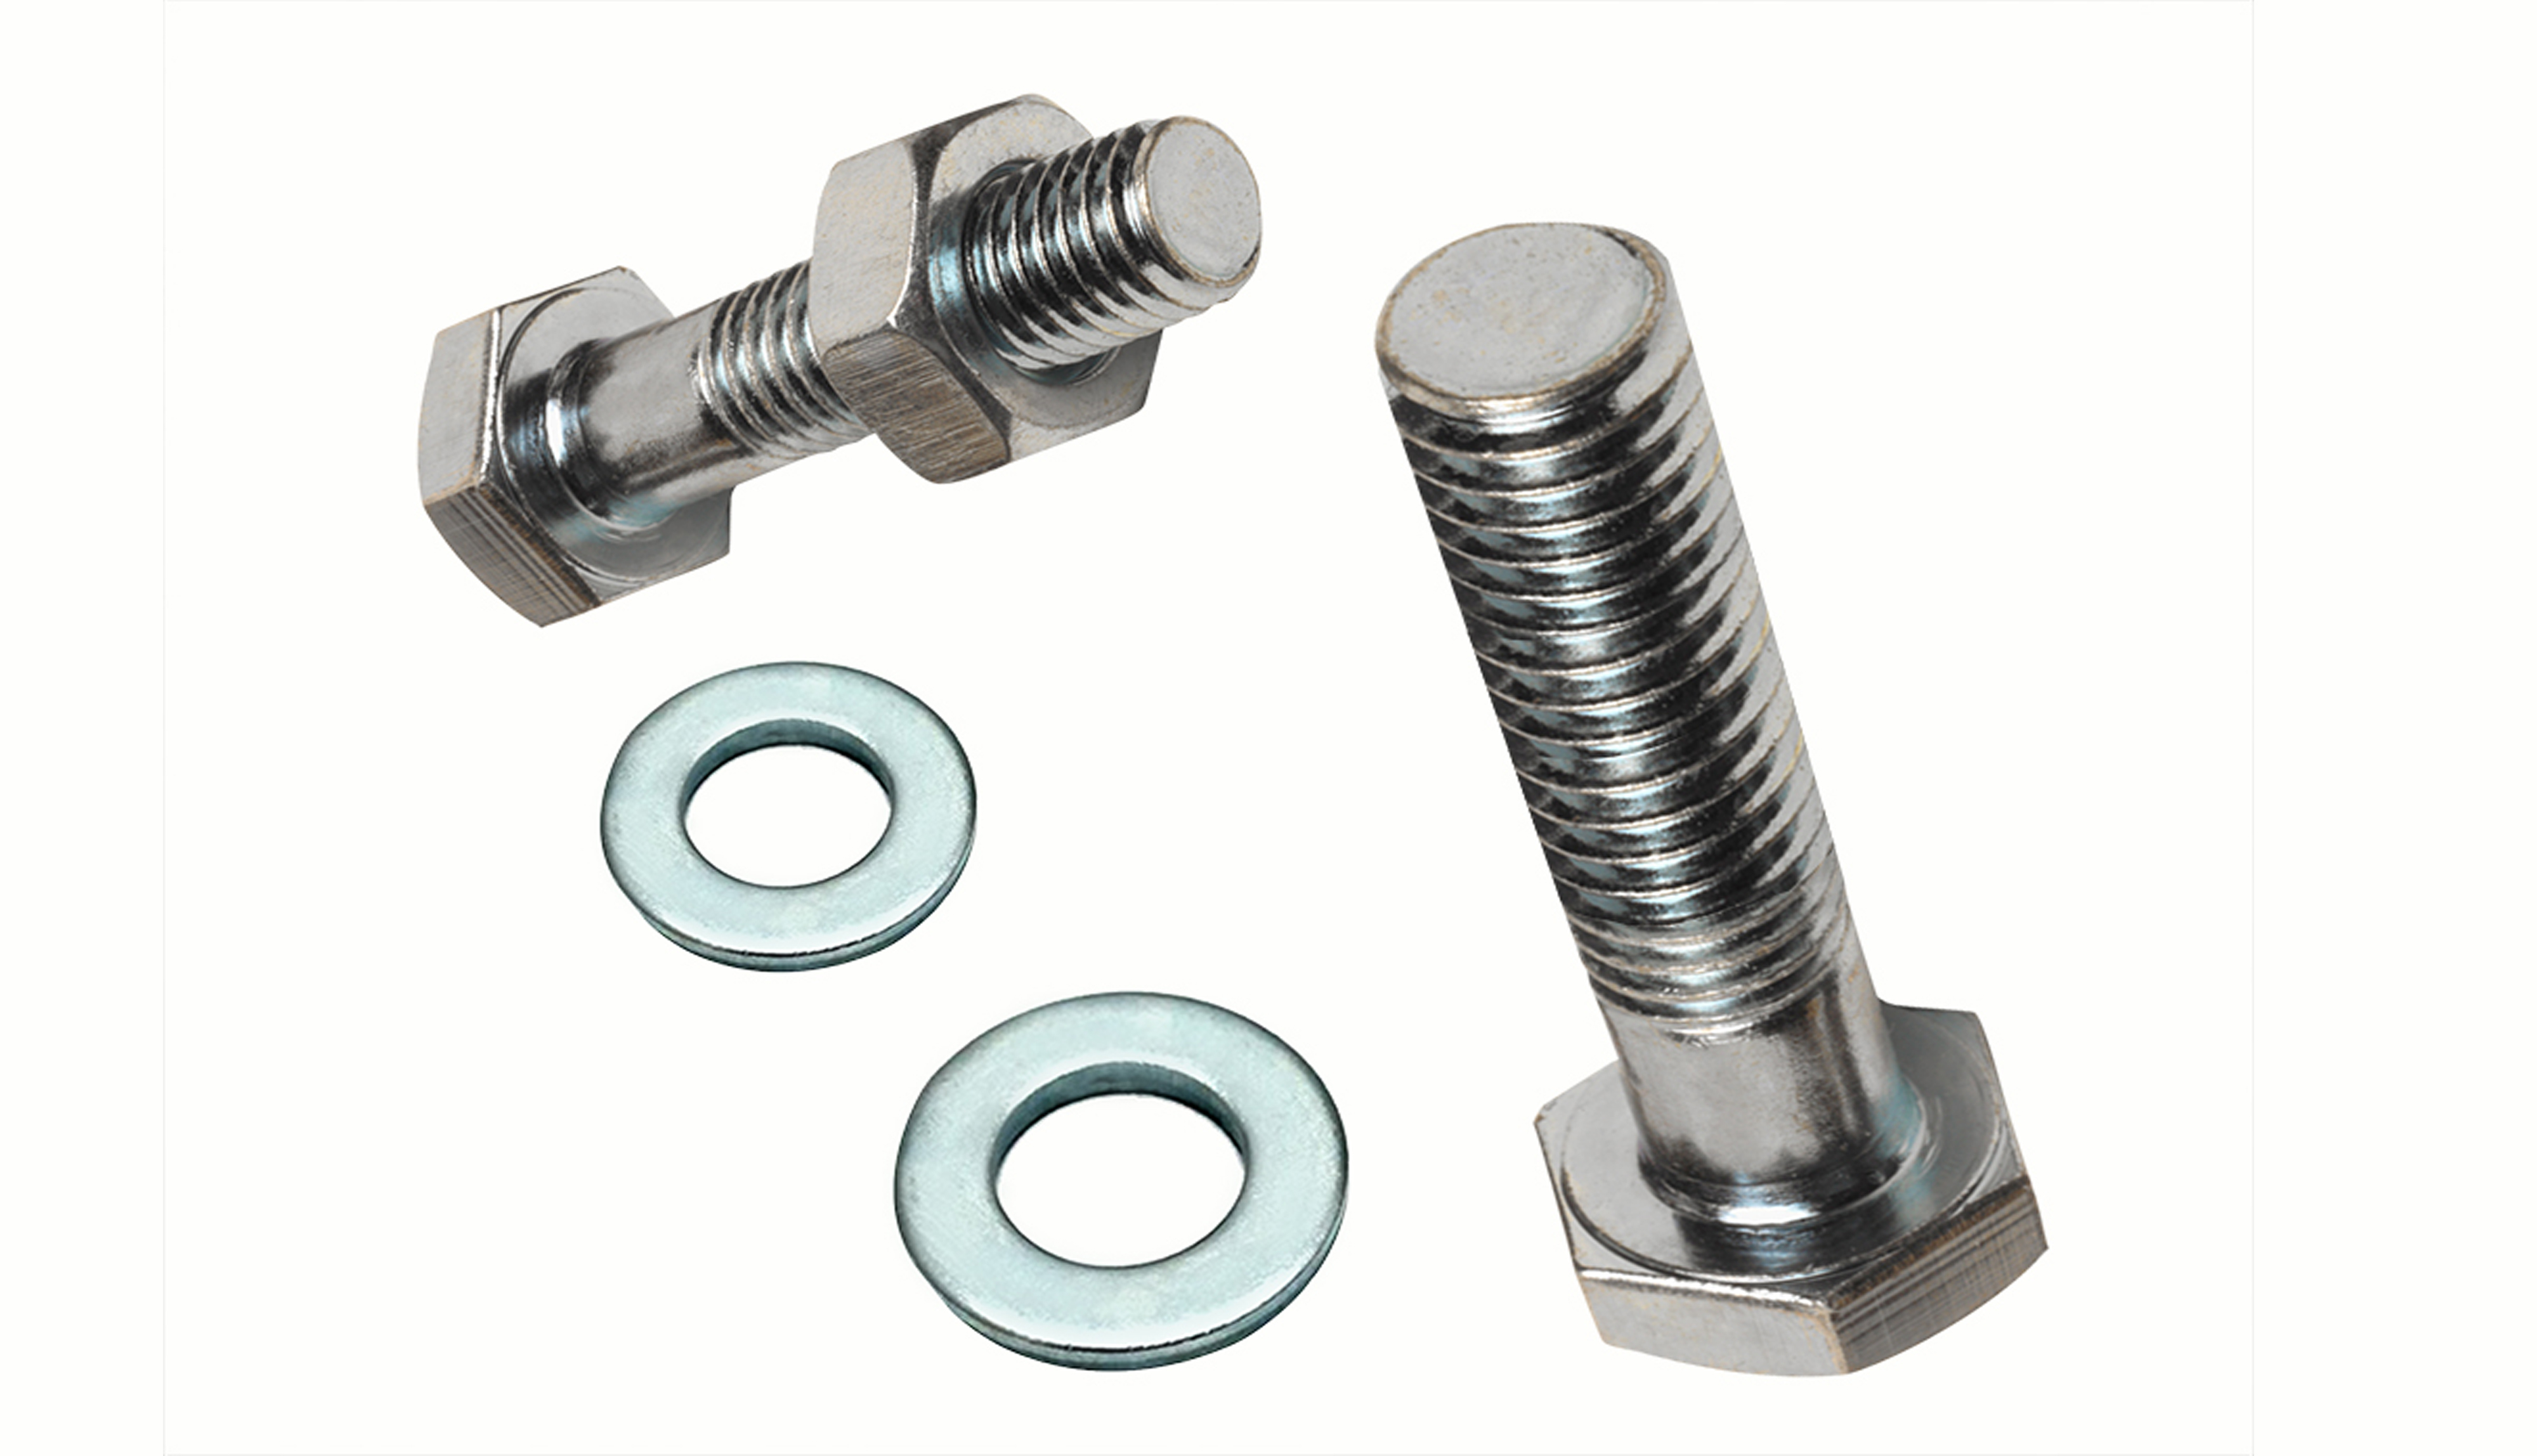 Wood nuts puzzle. Bolt Washer nut. Wood Nuts Bolts 191.